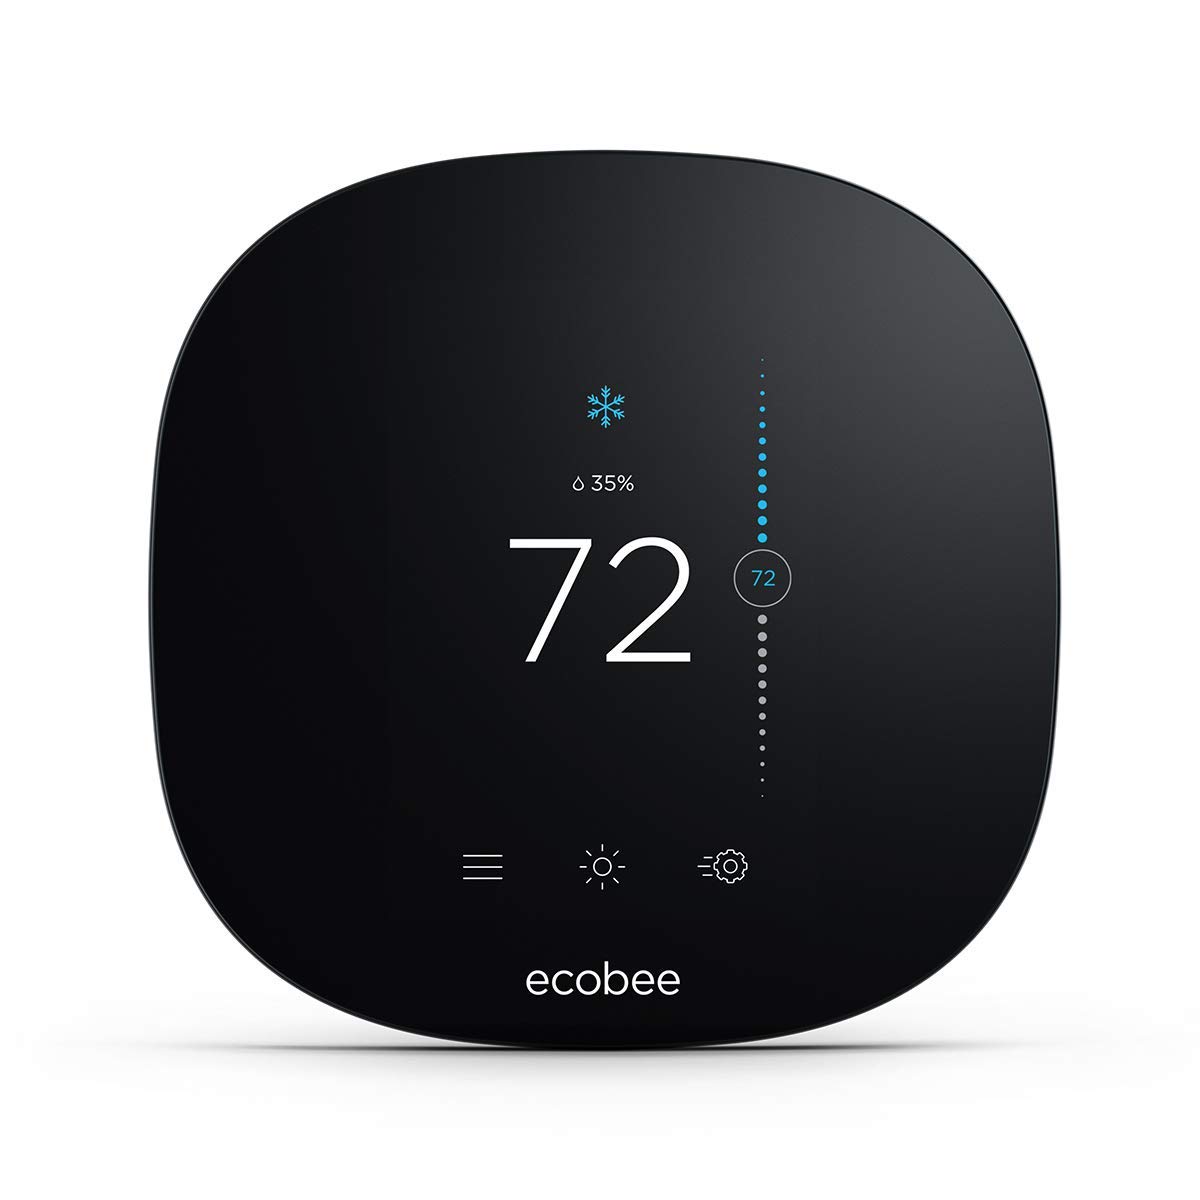 ecobee Smart Thermostat On Sale for $60 Off [Deal]